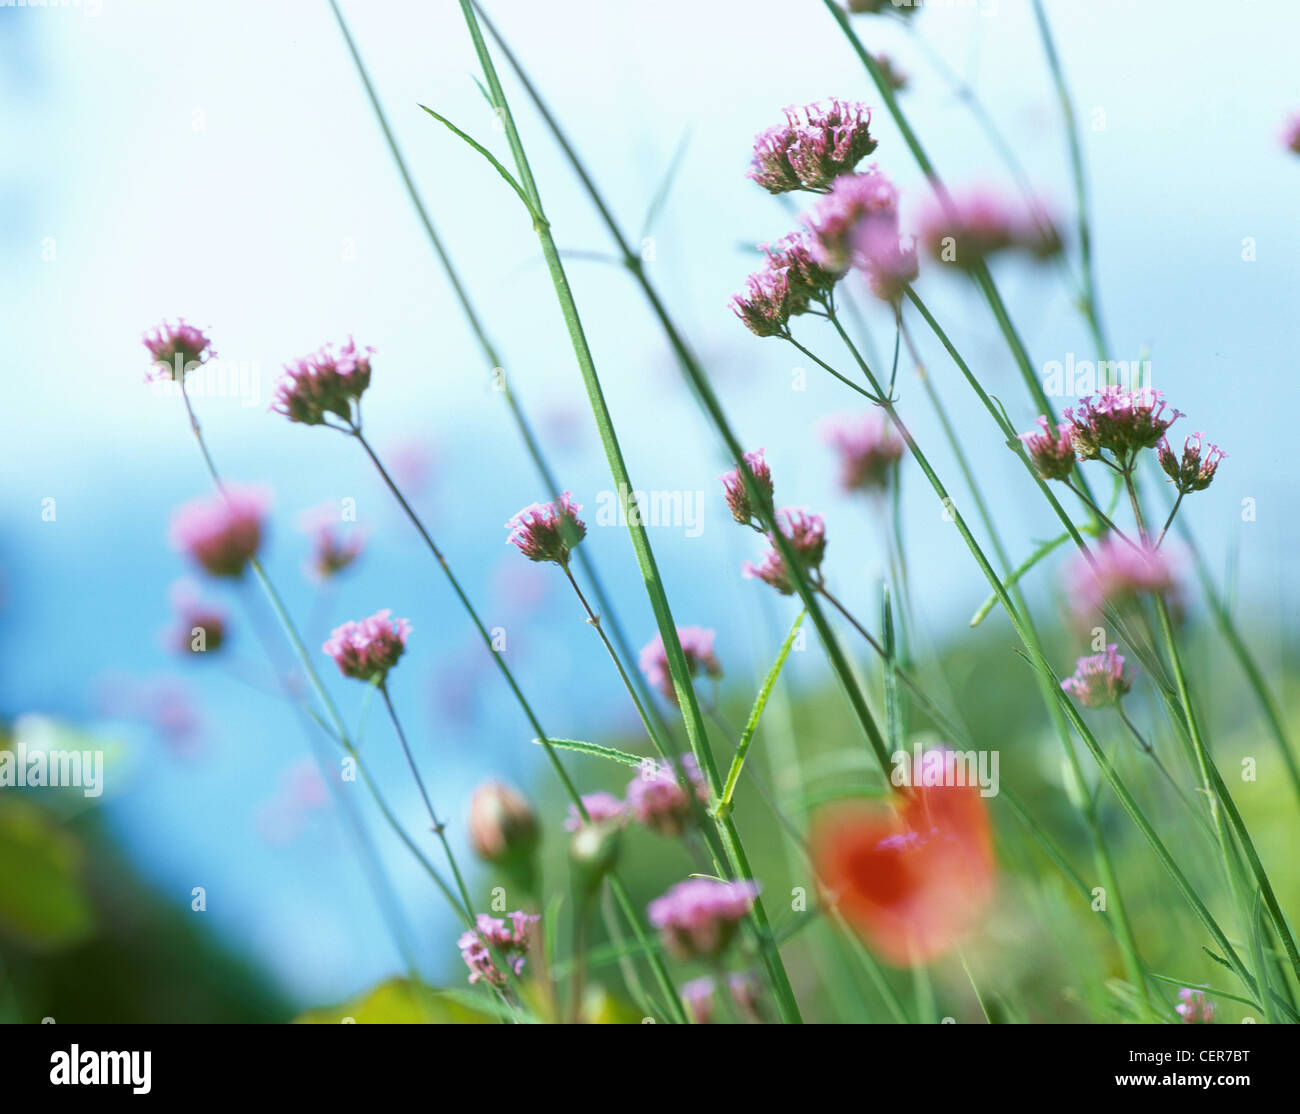 Small purple flower clusters on long thin green stalks Stock Photo